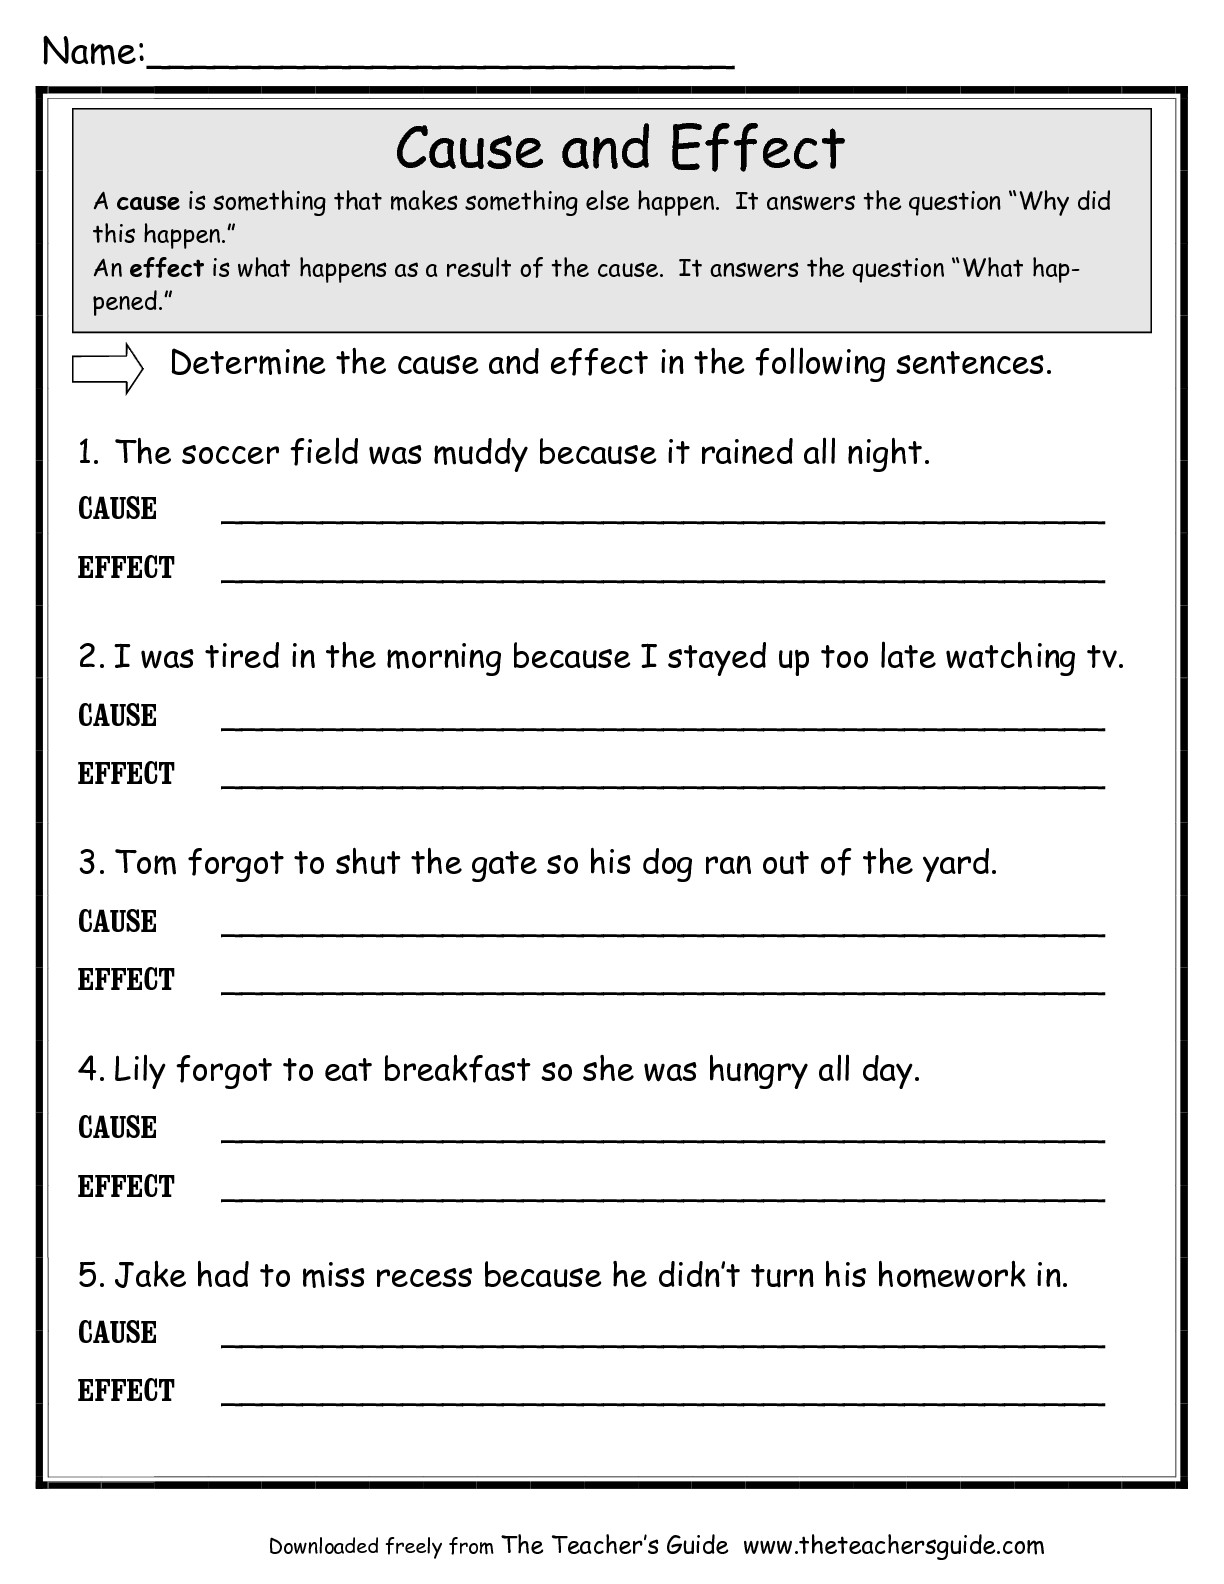 16-best-images-of-cause-and-effect-sentences-worksheet-free-cause-and